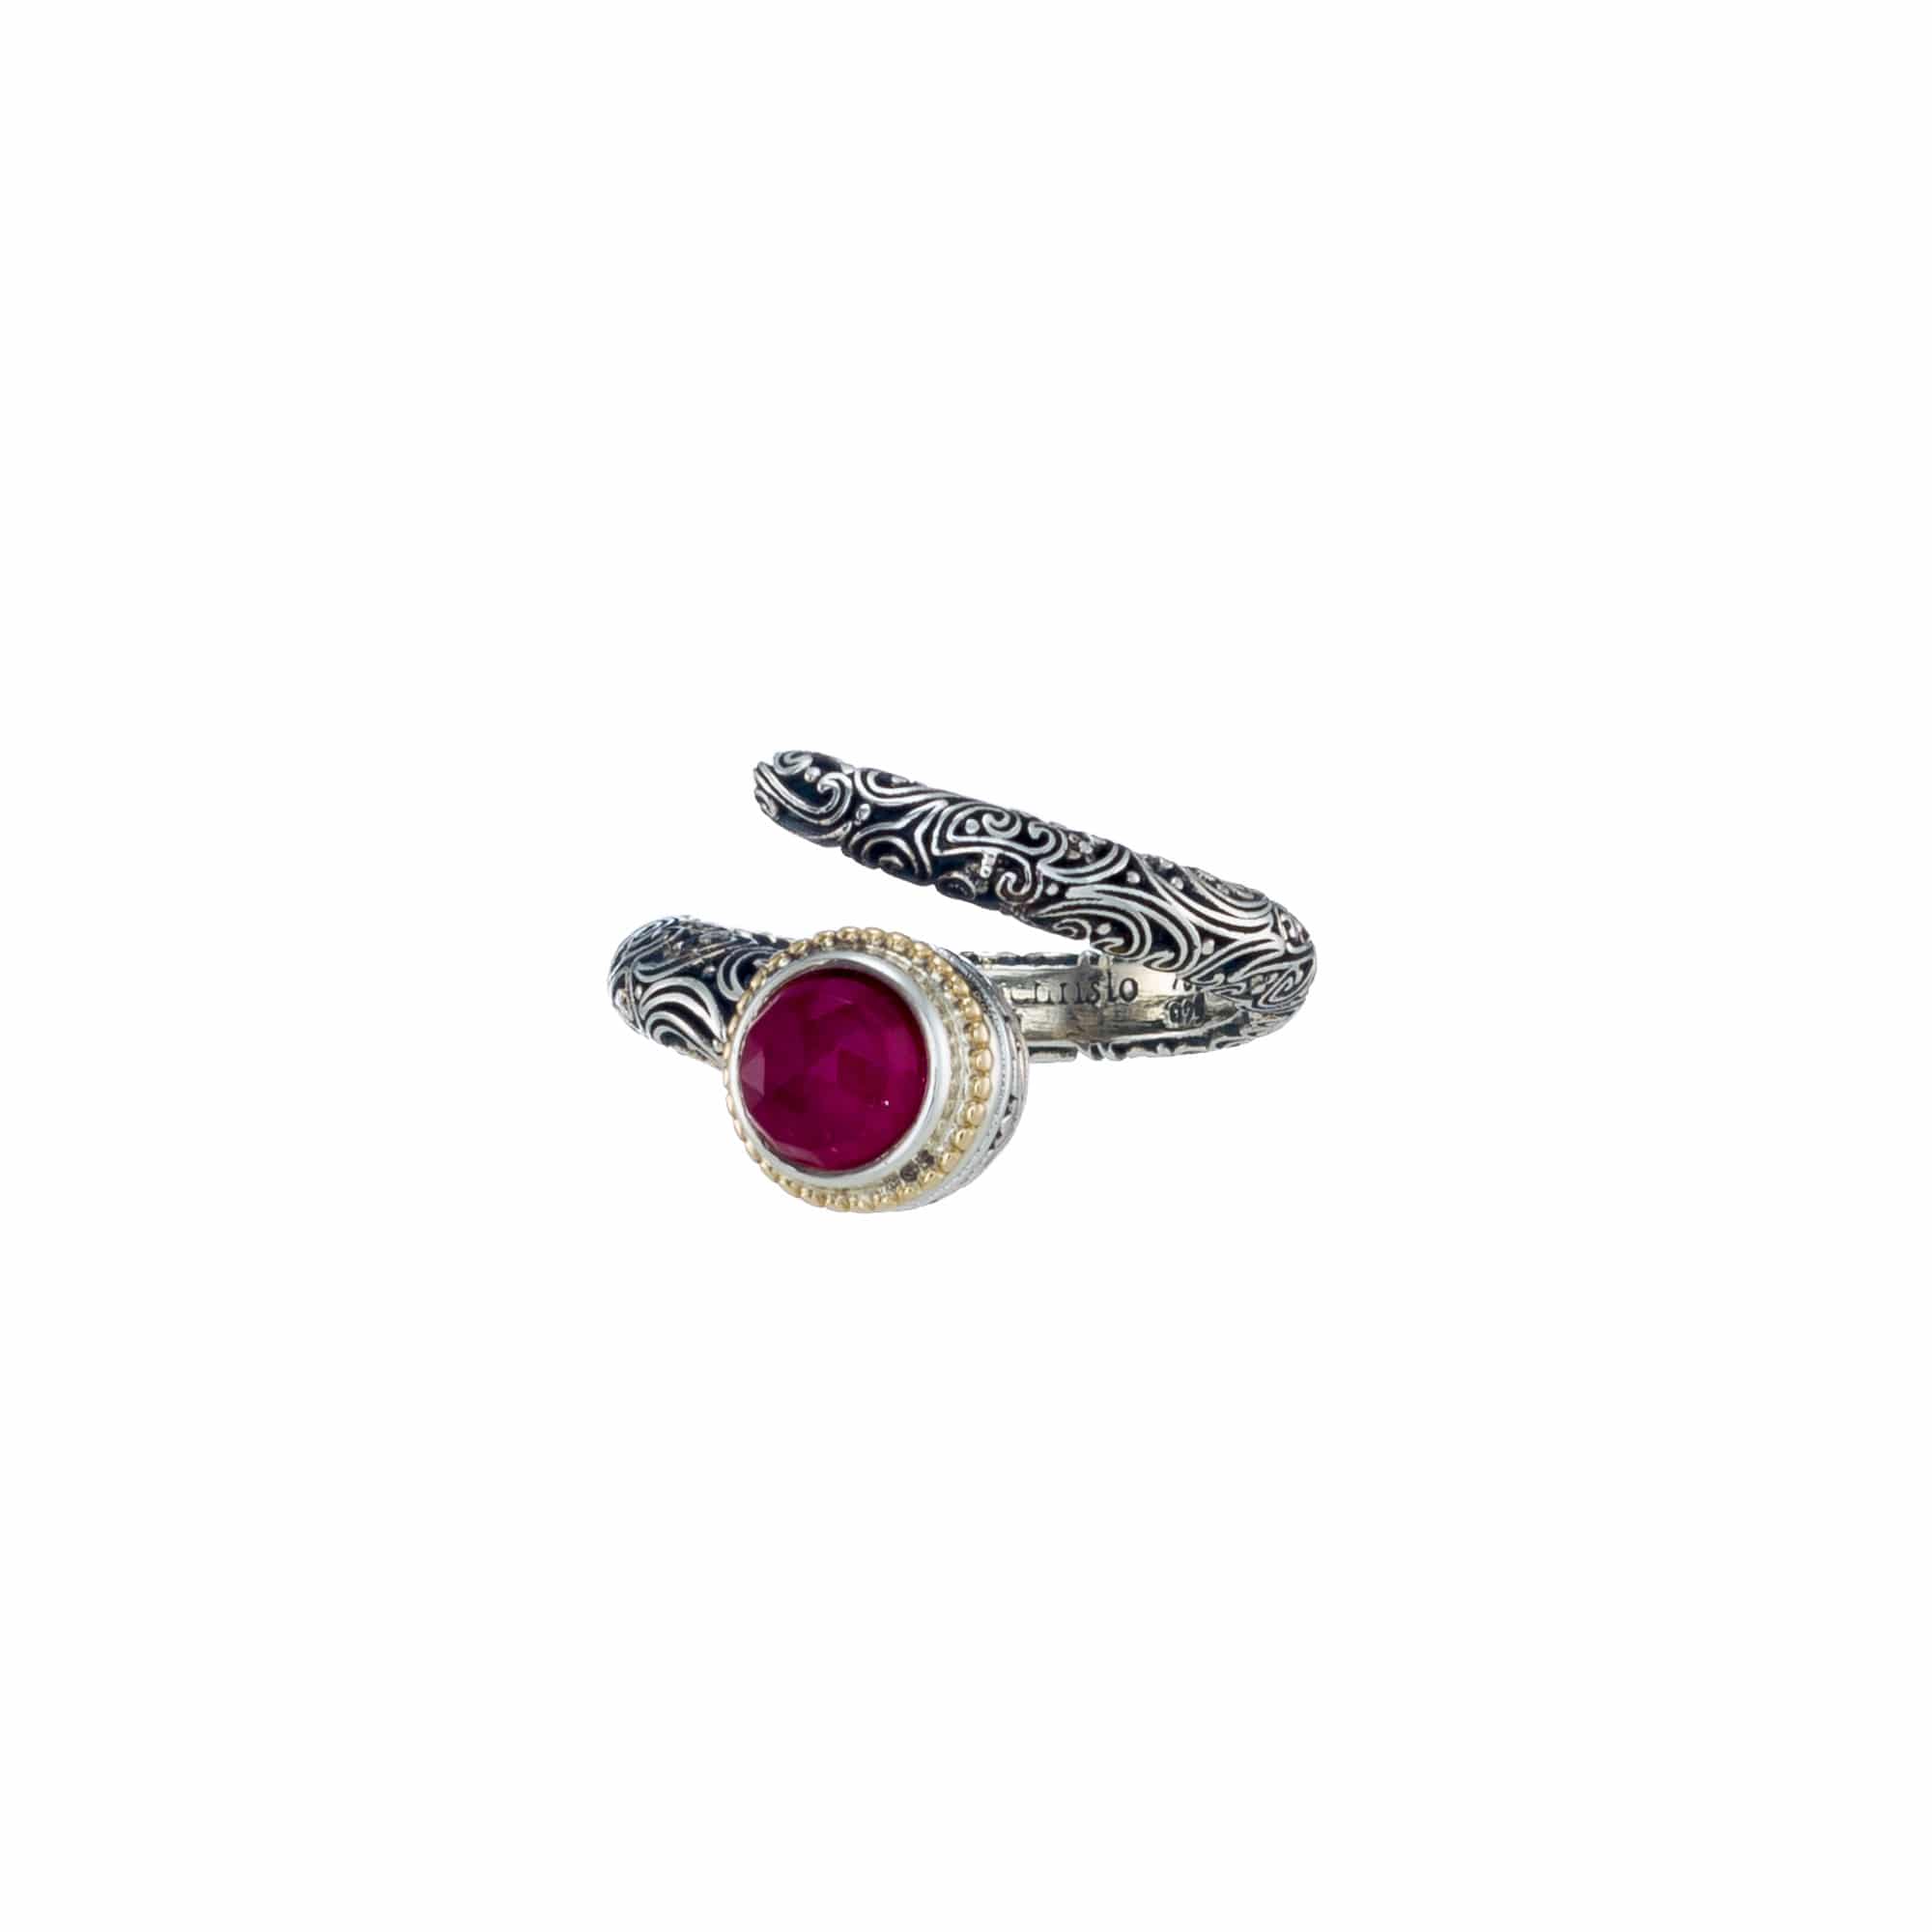 Eve ring adjustable in 18K Gold, sterling silver and Doublet stone ...